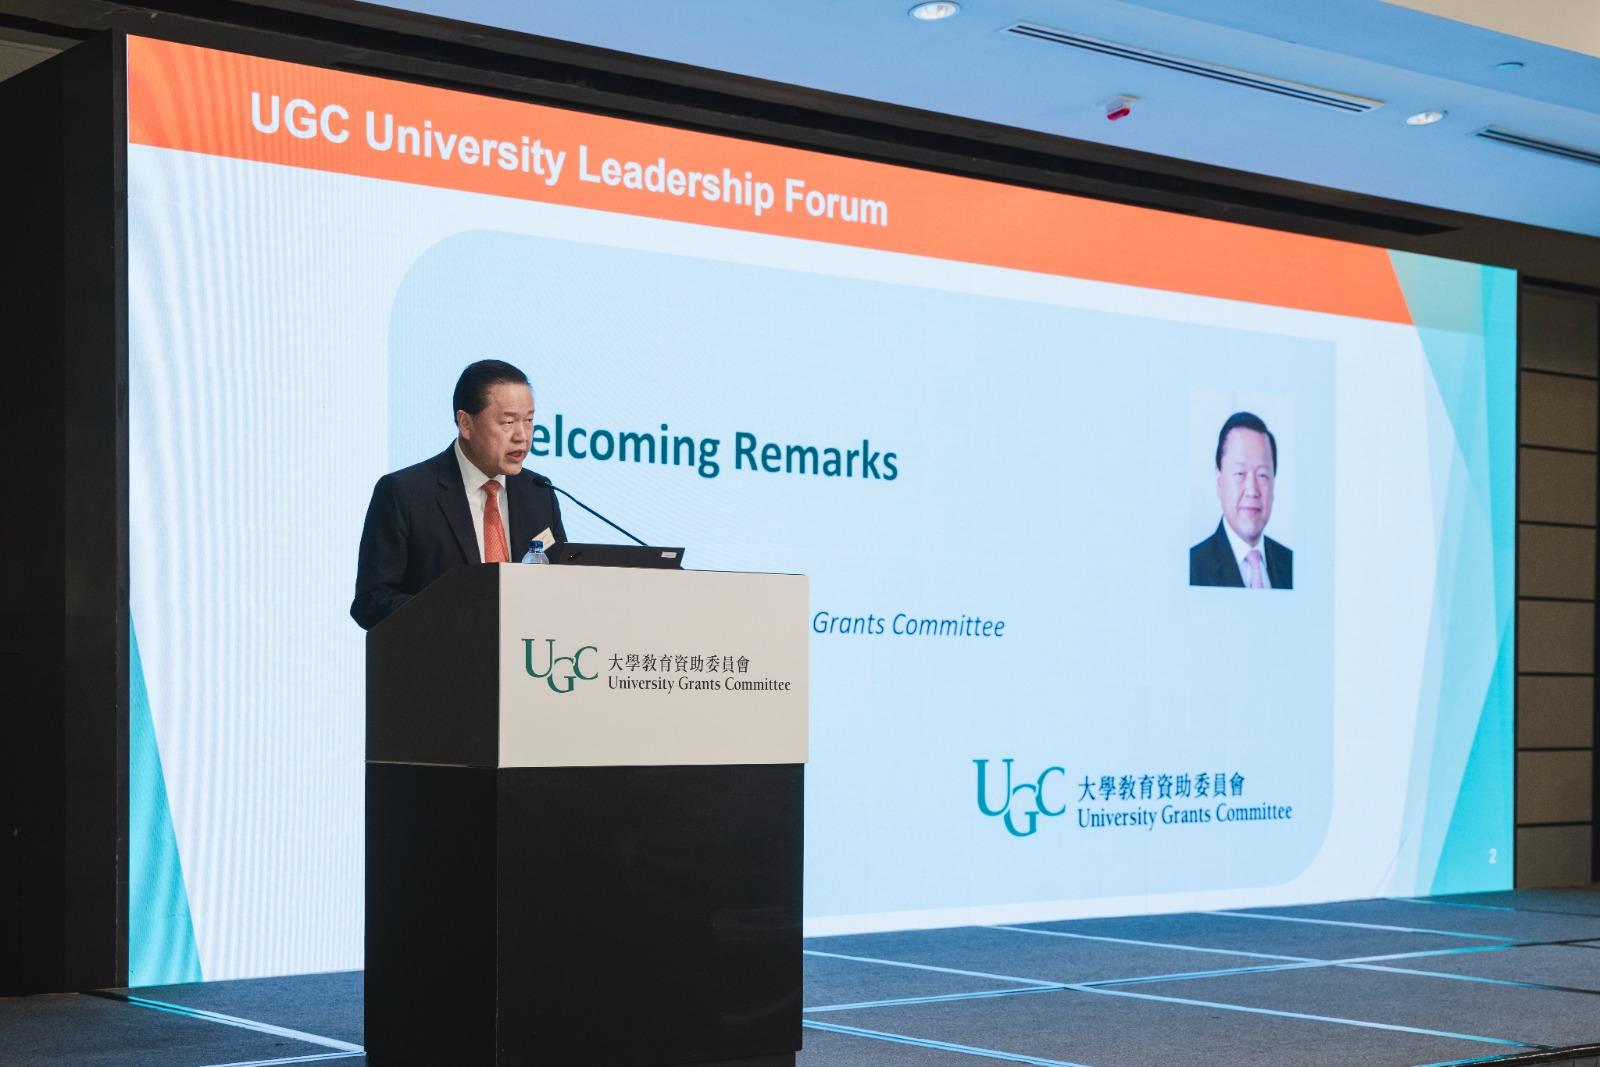 The Chairman of the University Grants Committee, Mr Tim Lui, delivered welcoming remarks at the University Leadership Forum today (January 30).